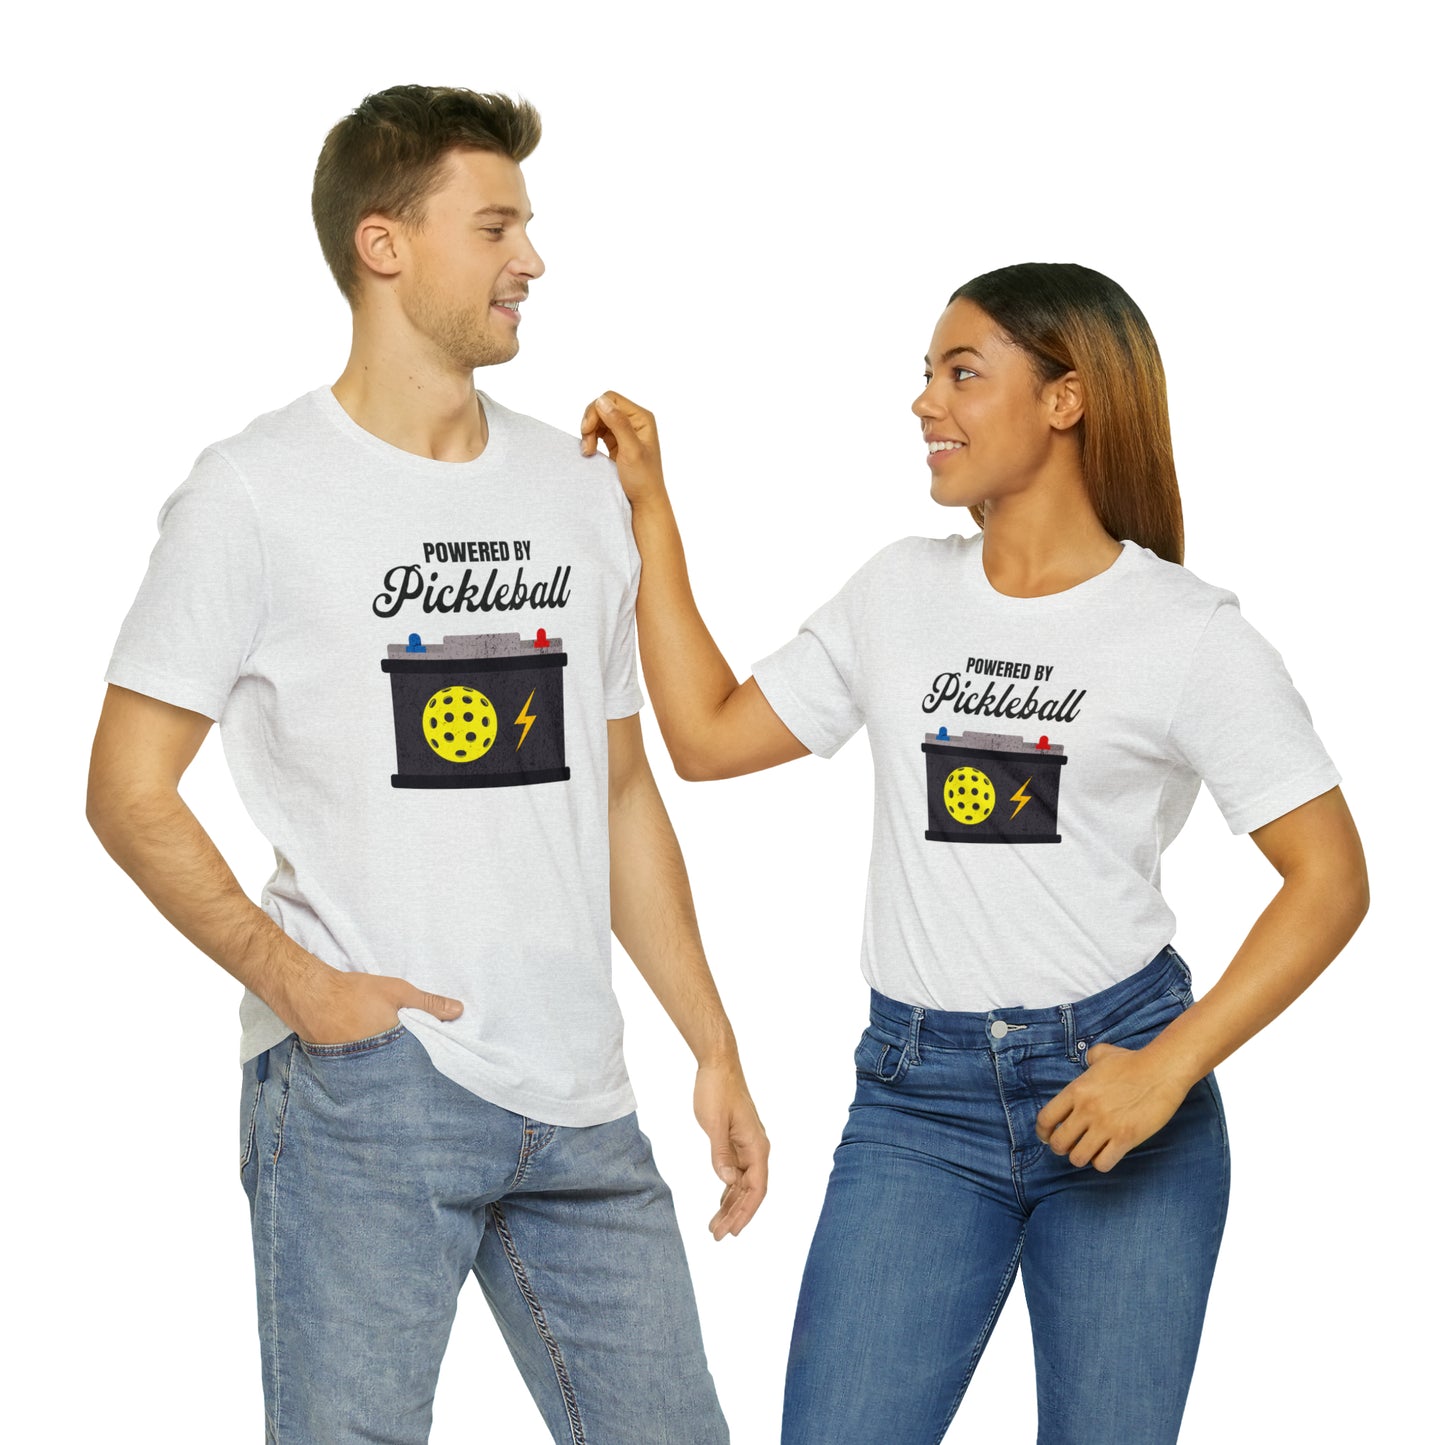 Powered by Pickleball - T-Shirt